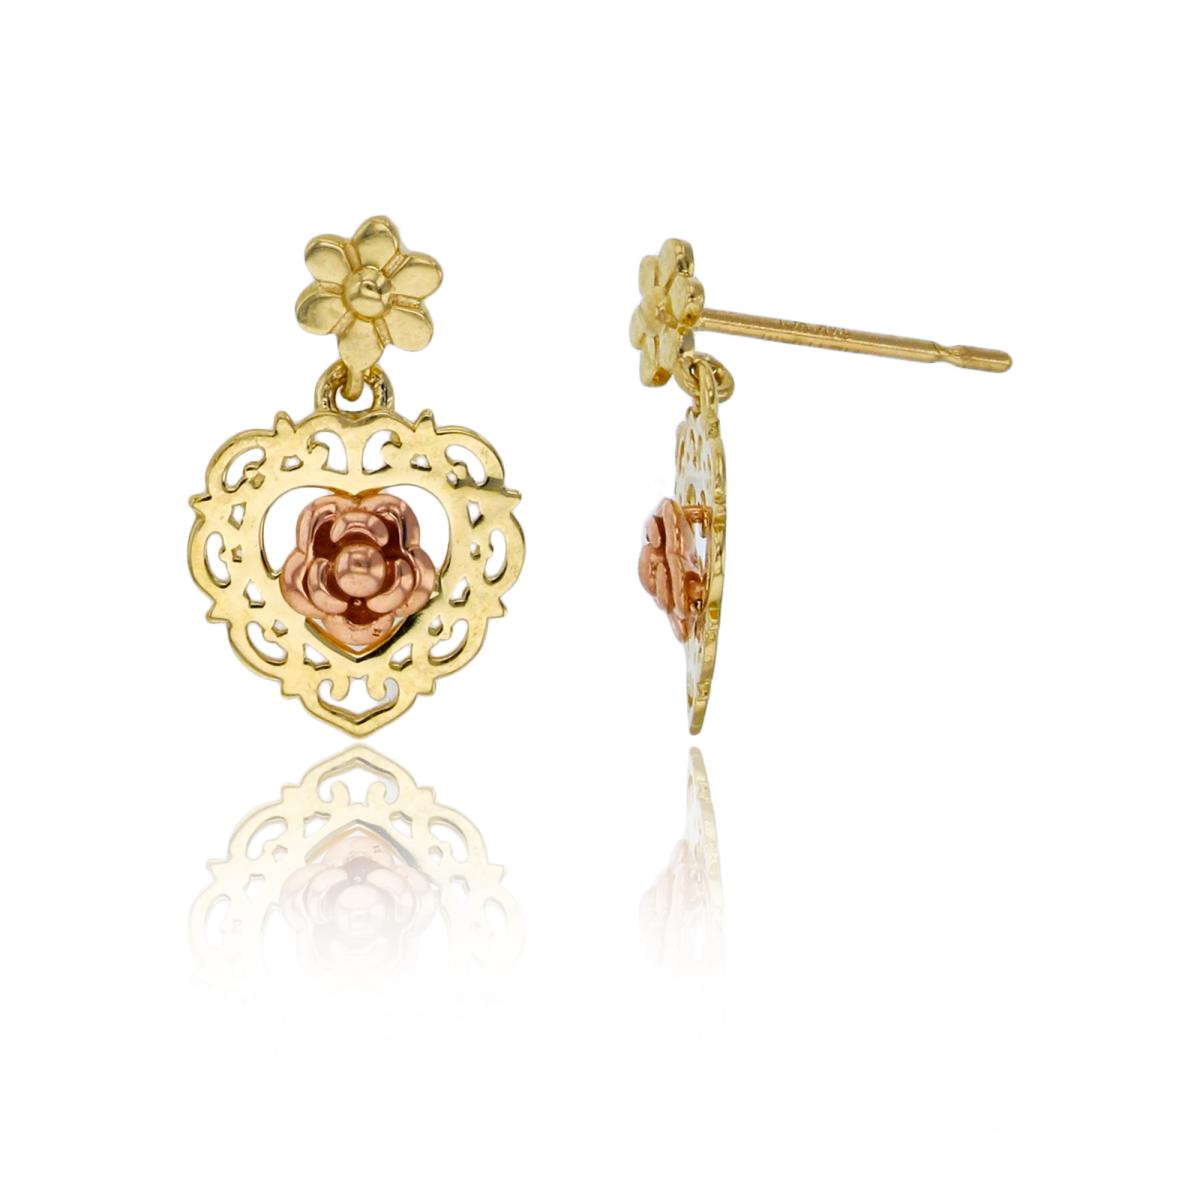 10K Two-Tone Gold 14x9mm Filigree Heart with Center Rose Dangling Earring